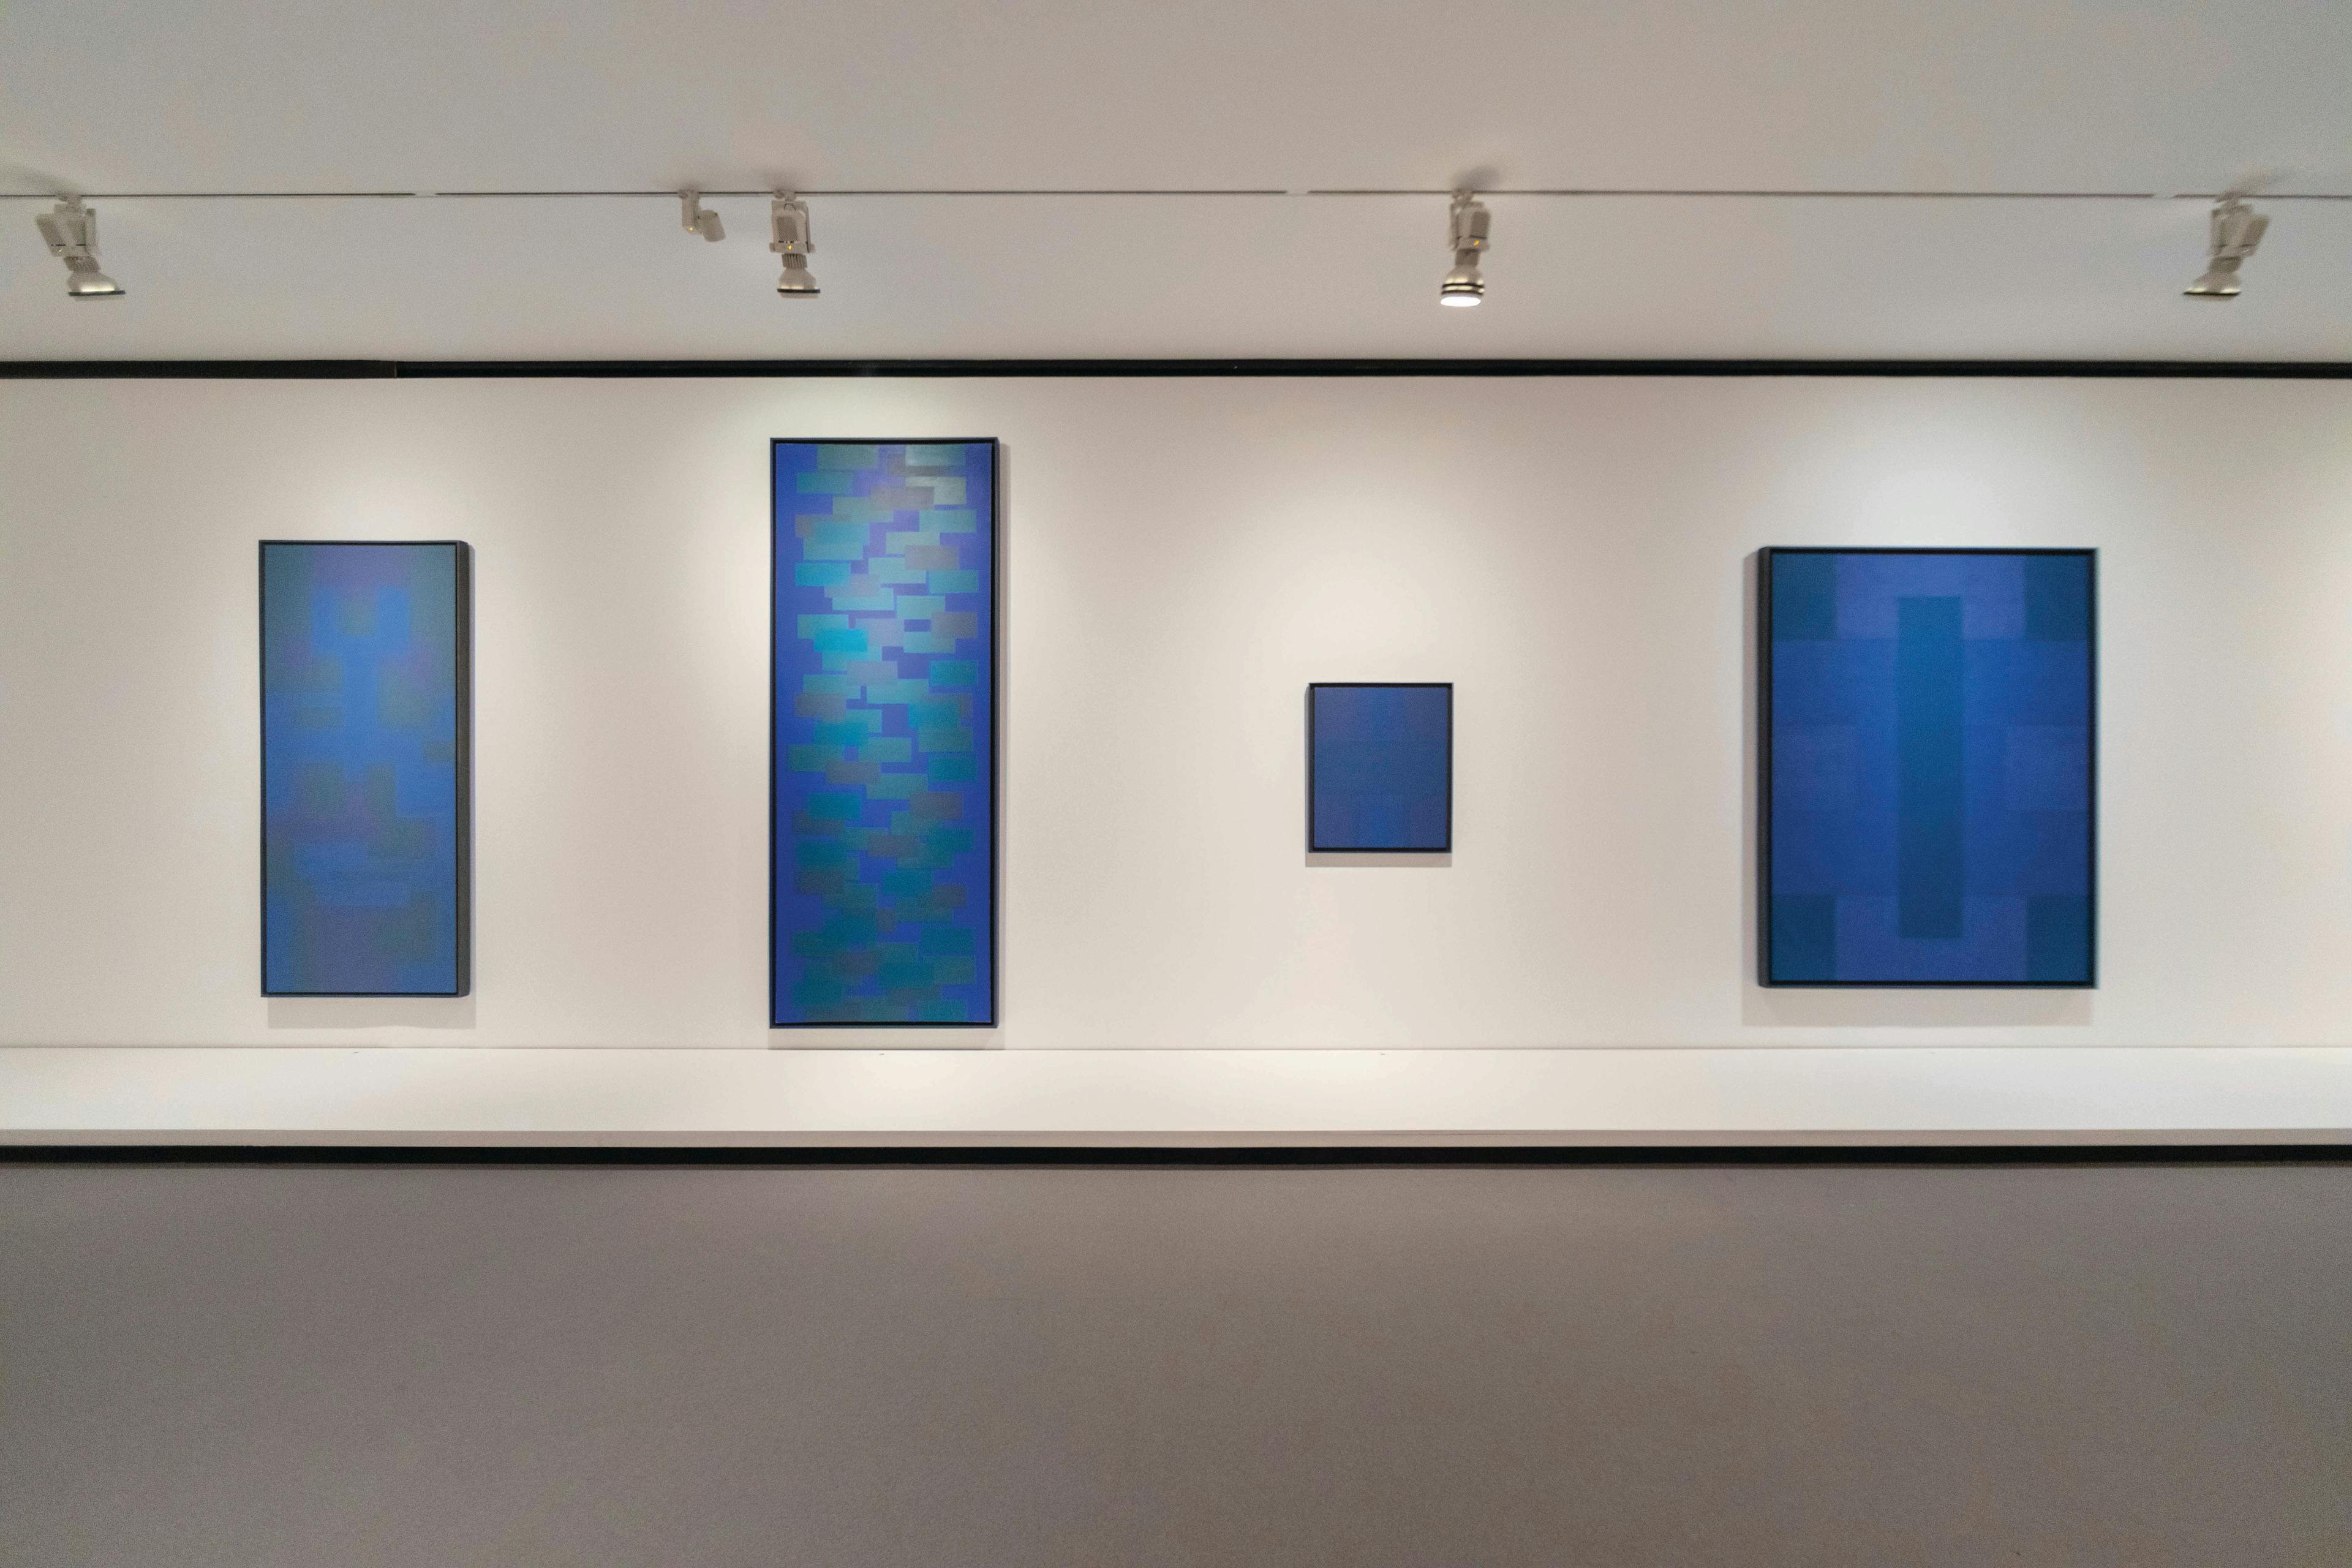 Installation view of an exhibition titled, Ad Reinhardt: “Art is art and everything else is everything else,” at Fundación Juan March in Madrid, dated 2021.